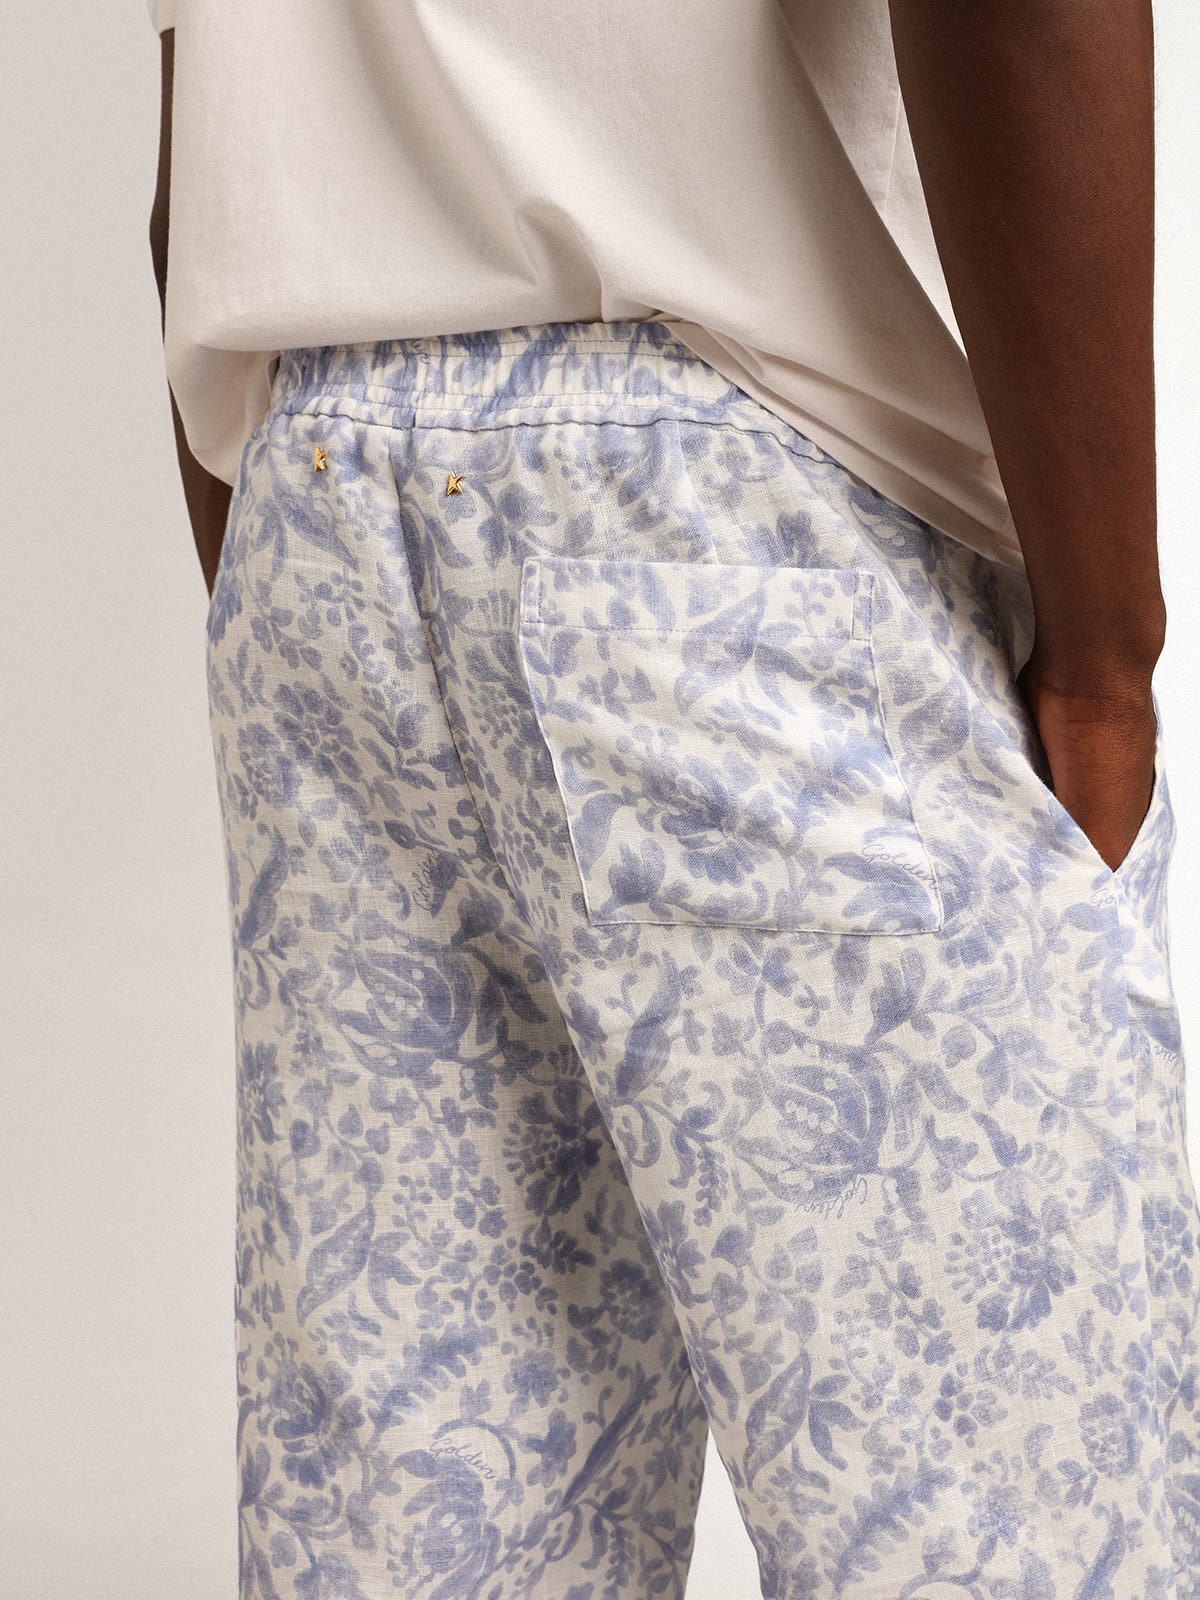 Golden Goose - Resort Collection linen trousers with Mediterranean blue print in 